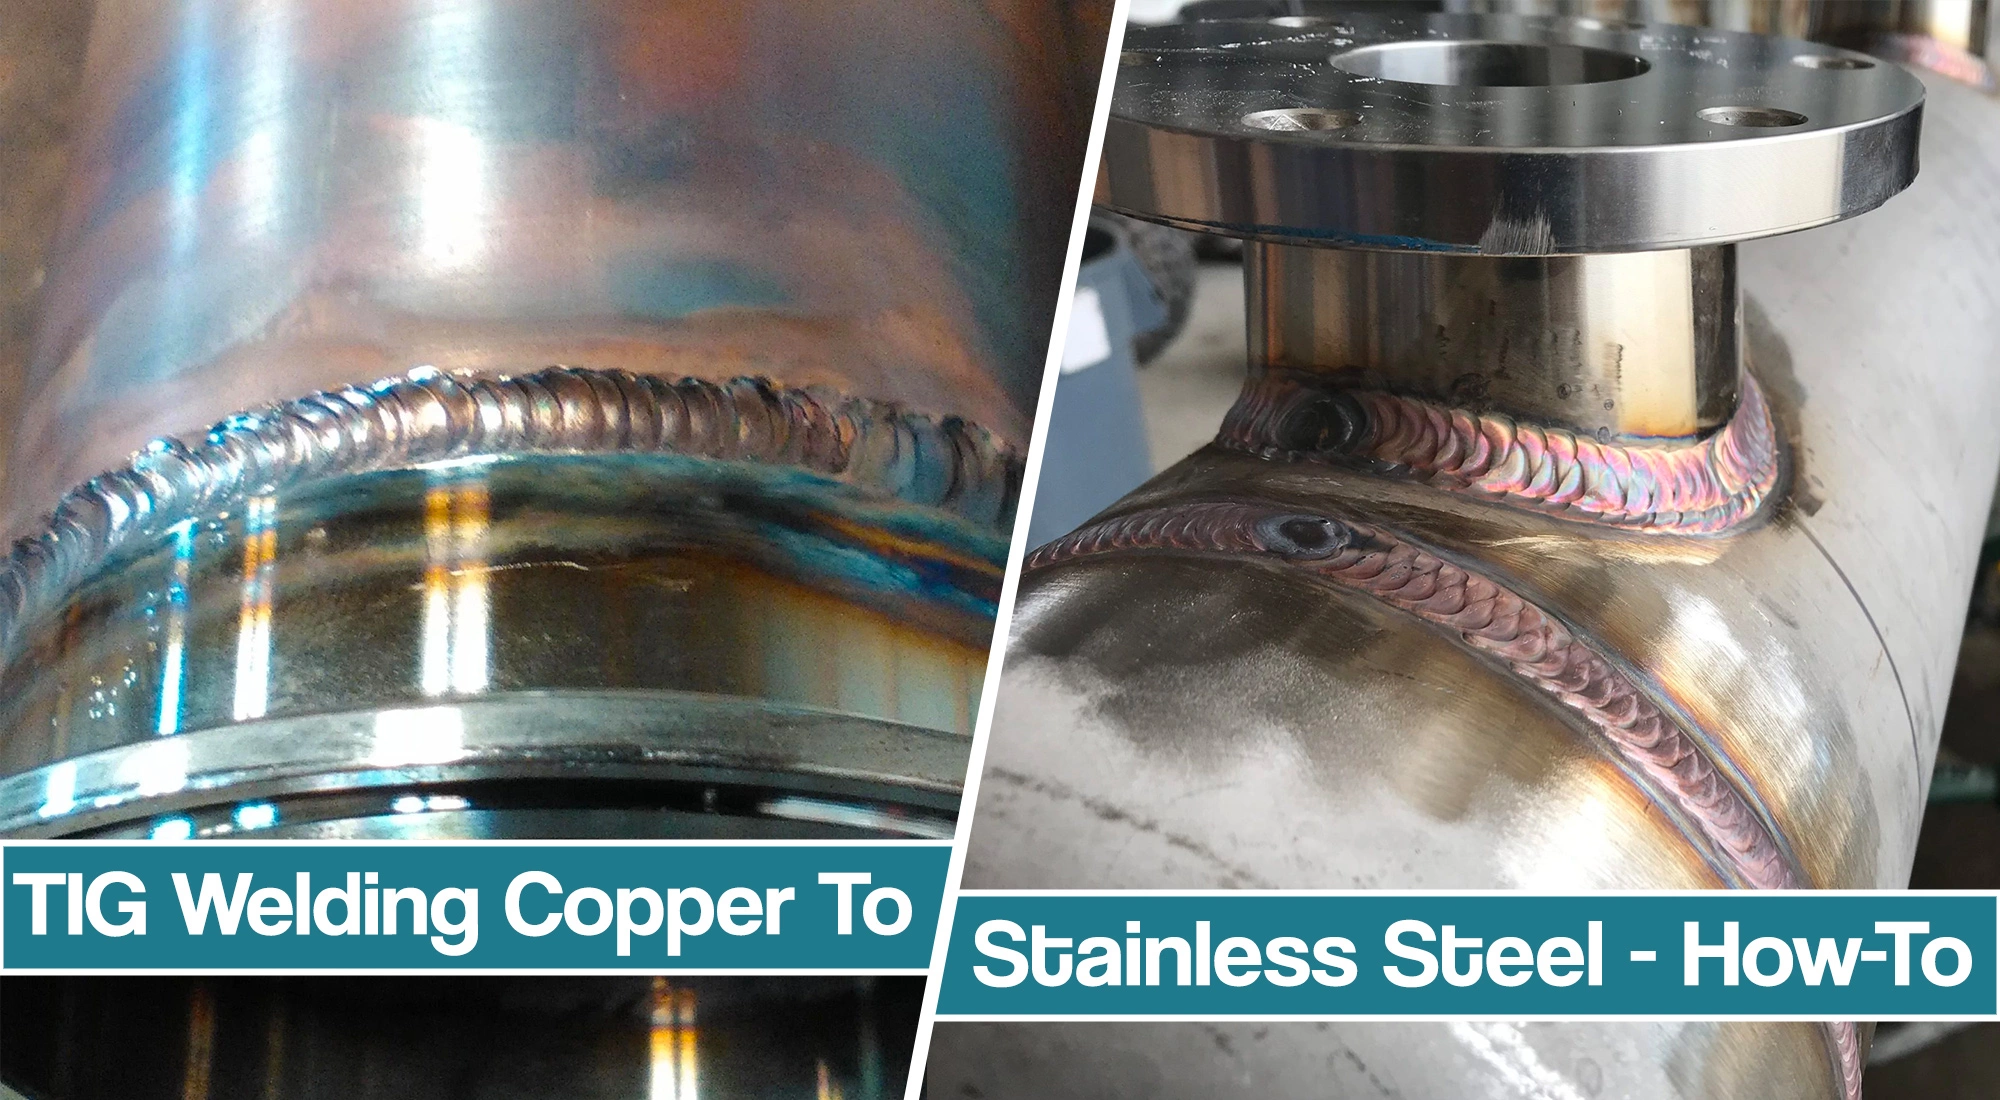 How To TIG Weld Copper To Stainless Steel